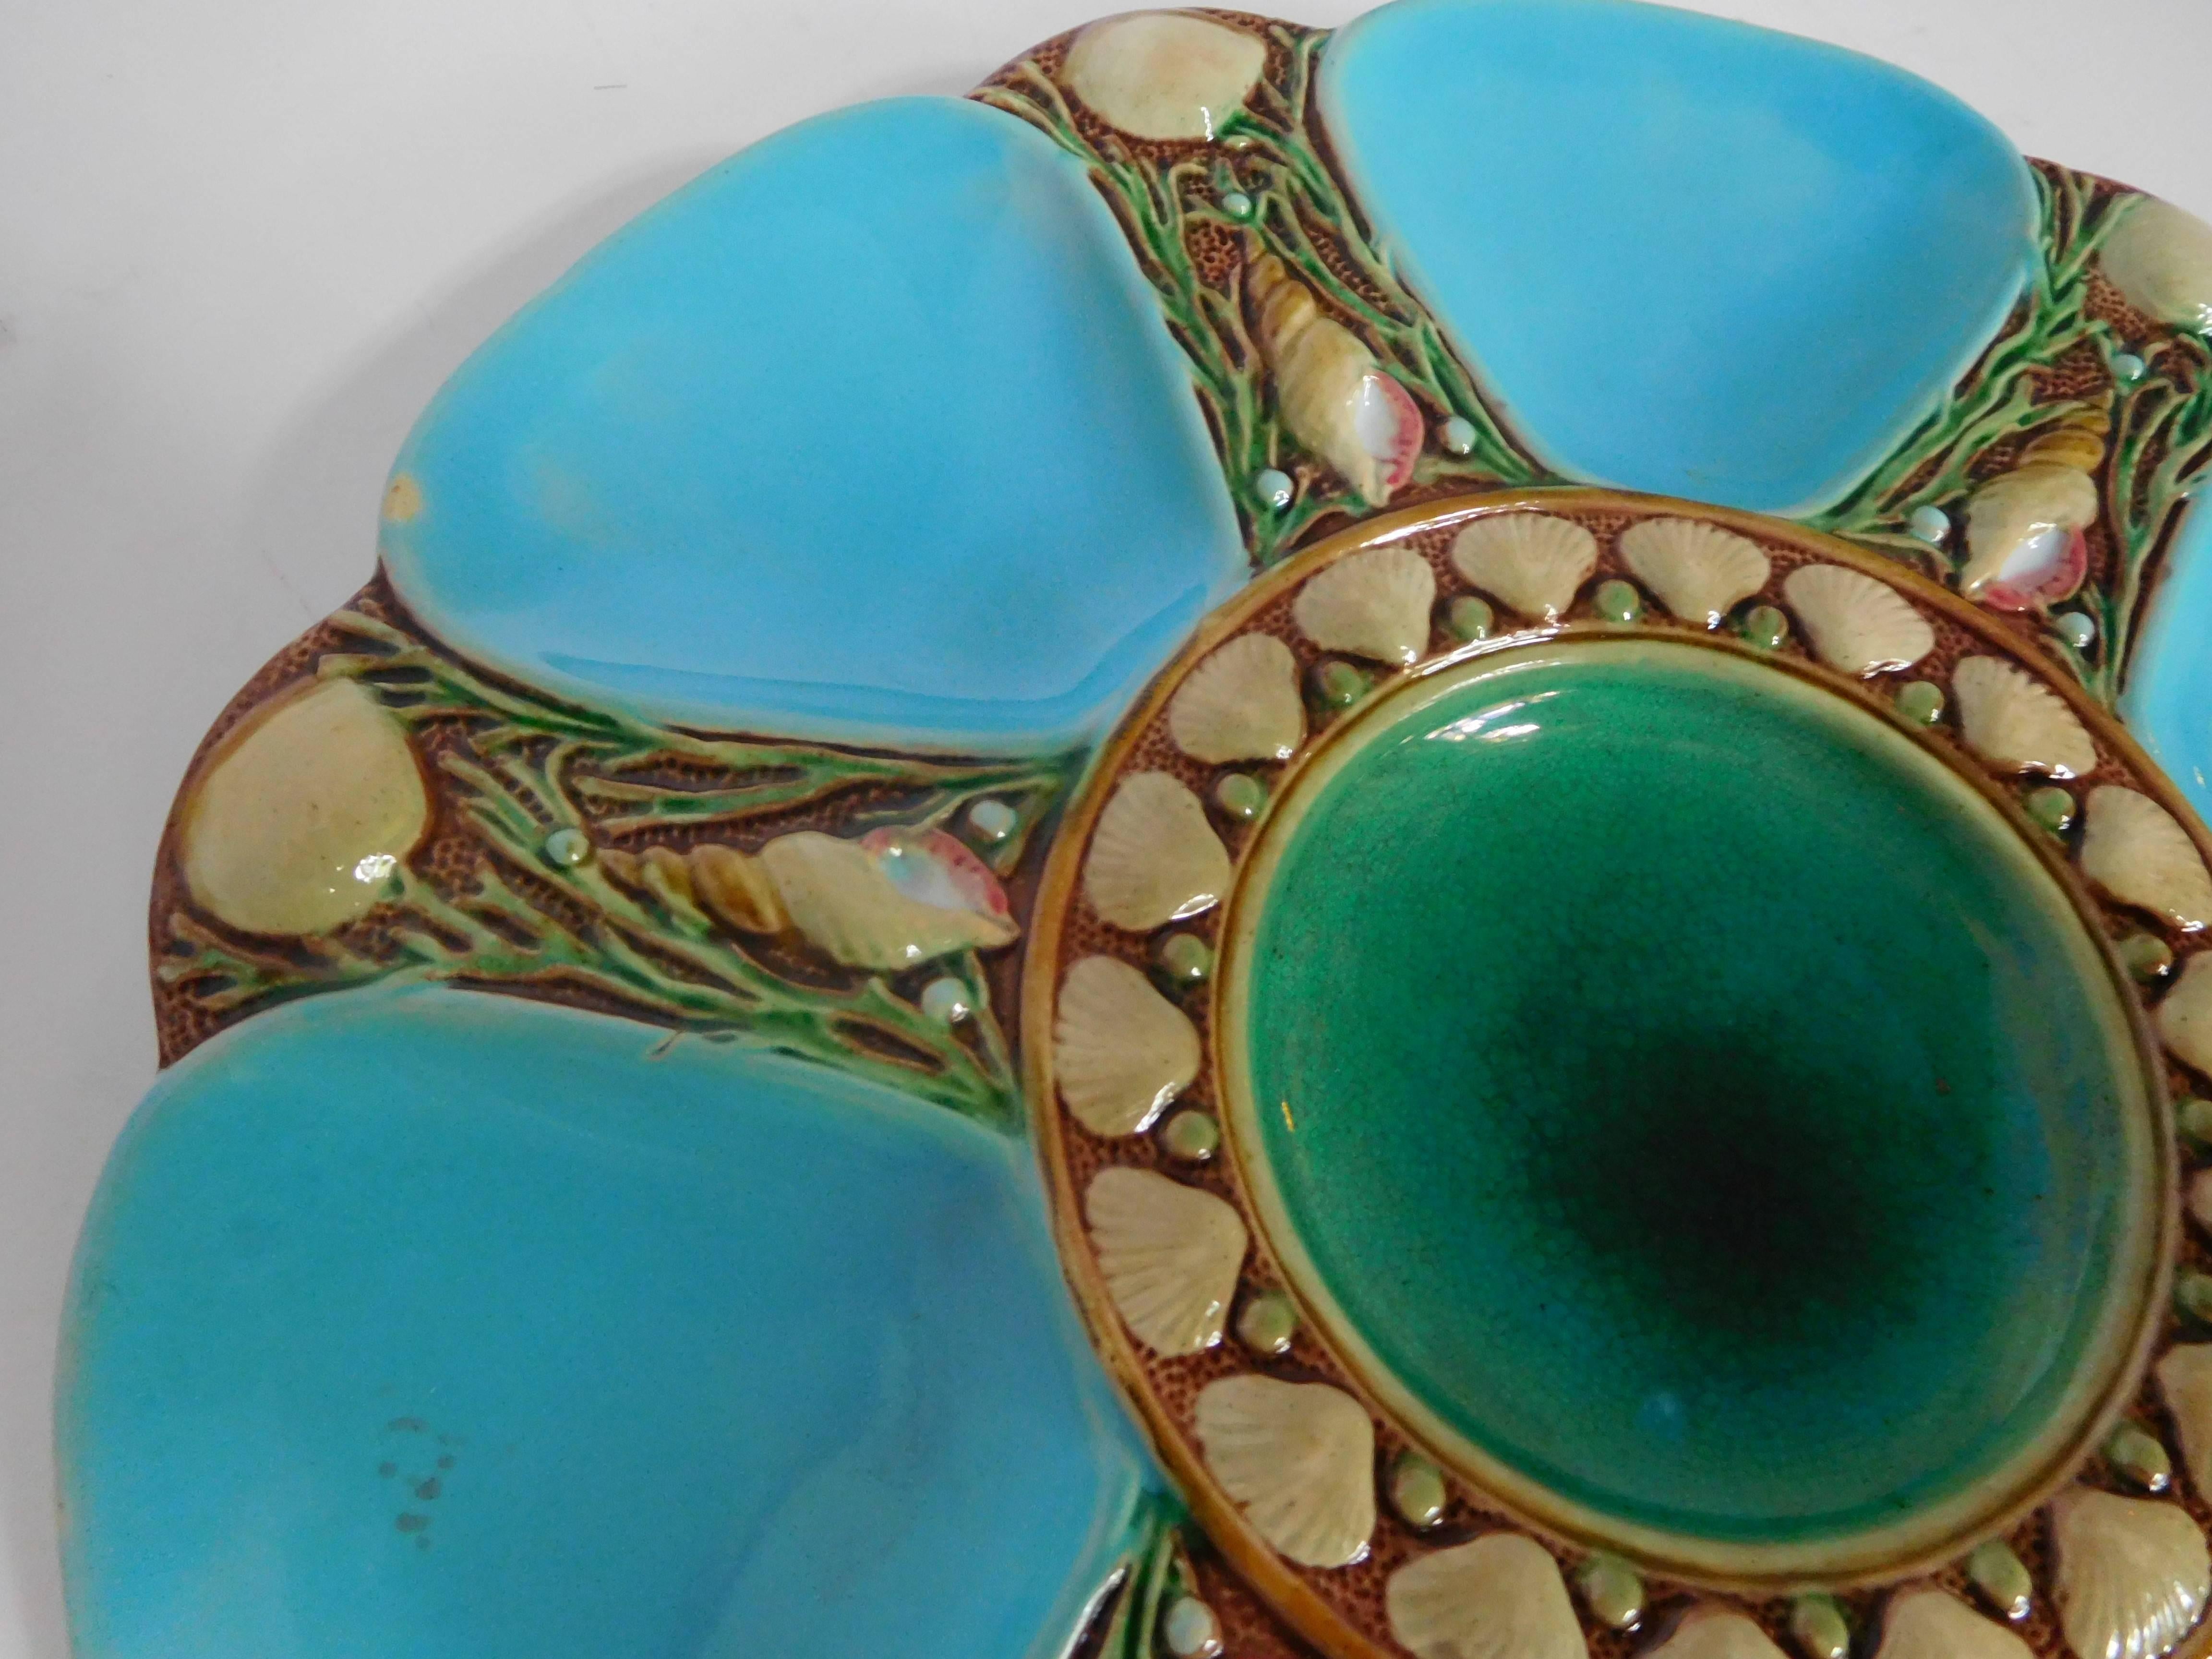 Mid-19th Century Minton Majolica Oyster Plate in Turquoise and Green, England, 1868